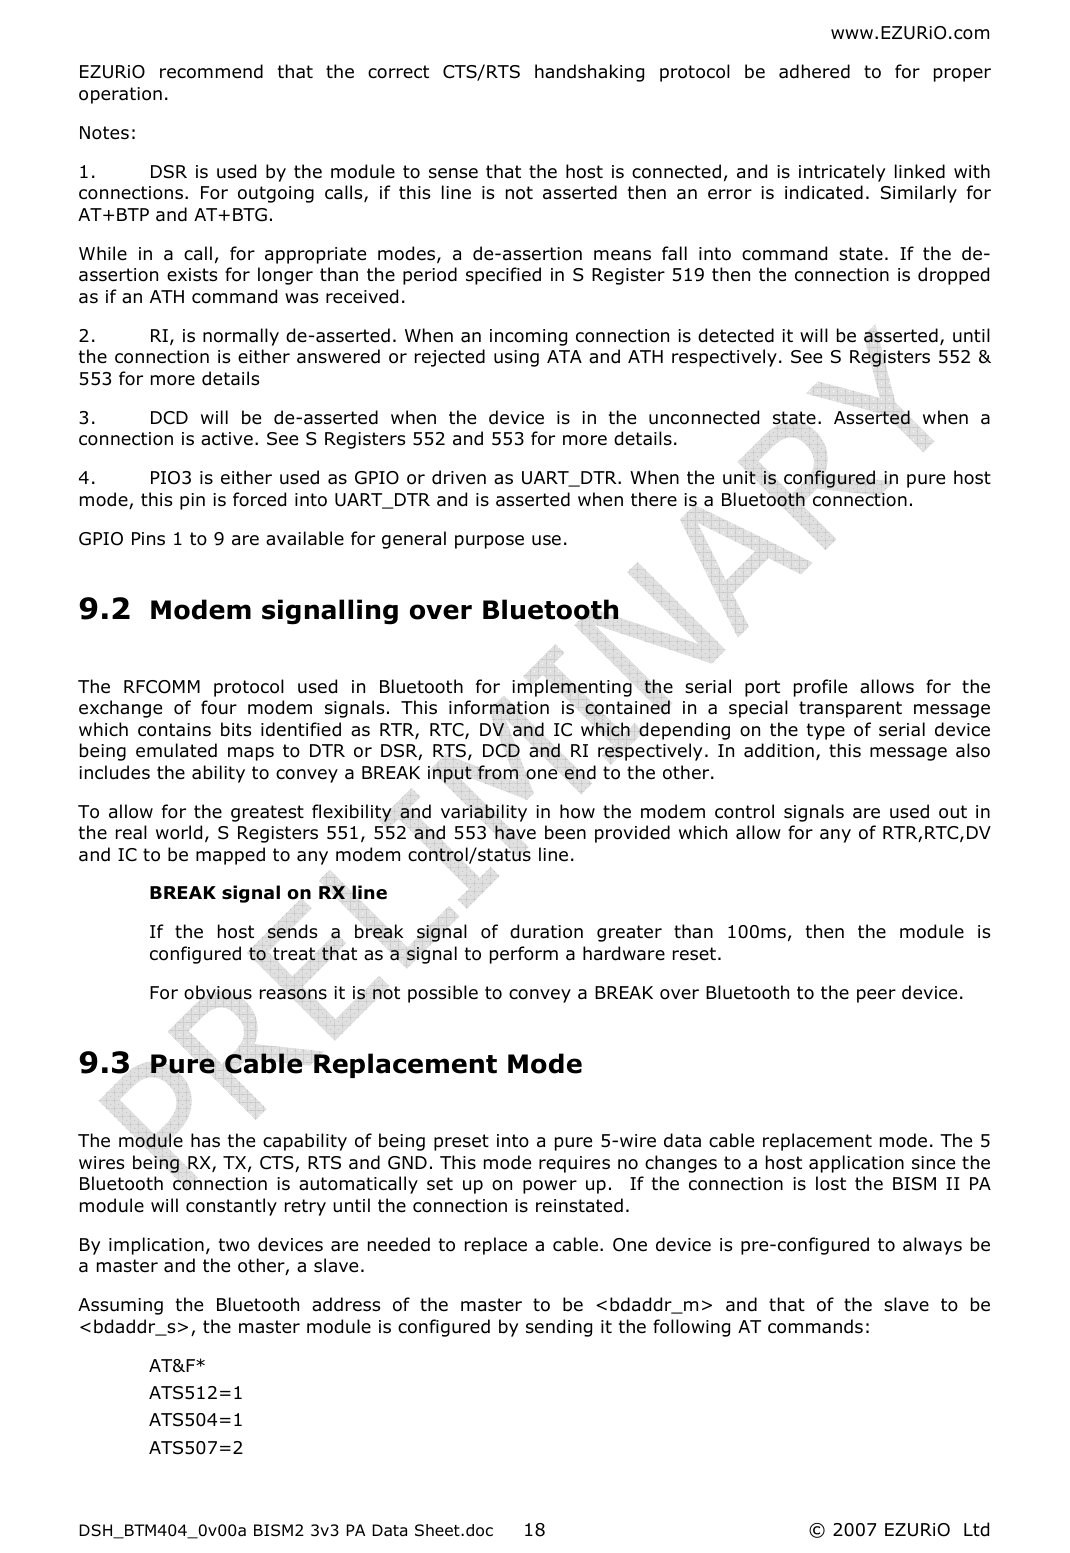 www.EZURiO.com DSH_BTM404_0v00a BISM2 3v3 PA Data Sheet.doc  © 2007 EZURiO  Ltd  18EZURiO  recommend  that  the  correct  CTS/RTS  handshaking  protocol  be  adhered  to  for  proper operation.  Notes: 1.  DSR is used by the module to sense that the host is connected, and is intricately linked with connections.  For  outgoing  calls,  if  this  line  is  not  asserted  then  an  error  is  indicated.  Similarly  for AT+BTP and AT+BTG. While  in  a  call,  for  appropriate  modes,  a  de-assertion  means  fall  into  command  state.  If  the  de-assertion exists for longer than the period specified in S Register 519 then the connection is dropped as if an ATH command was received. 2.  RI, is normally de-asserted. When an incoming connection is detected it will be asserted, until the connection is either answered or rejected using ATA and ATH respectively. See S Registers 552 &amp; 553 for more details 3.  DCD  will  be  de-asserted  when  the  device  is  in  the  unconnected  state.  Asserted  when  a connection is active. See S Registers 552 and 553 for more details. 4.  PIO3 is either used as GPIO or driven as UART_DTR. When the unit is configured in pure host mode, this pin is forced into UART_DTR and is asserted when there is a Bluetooth connection. GPIO Pins 1 to 9 are available for general purpose use. 9.2 Modem signalling over Bluetooth  The  RFCOMM  protocol  used  in  Bluetooth  for  implementing  the  serial  port  profile  allows  for  the exchange  of  four  modem  signals.  This  information  is  contained  in  a  special  transparent  message which contains bits identified  as  RTR, RTC, DV and IC which depending on the type of serial device being emulated maps to  DTR or DSR, RTS, DCD and RI respectively. In addition, this message also includes the ability to convey a BREAK input from one end to the other. To allow for the greatest flexibility and variability in how the modem control signals are used out in the real world, S Registers 551, 552 and 553 have been provided which allow for any of RTR,RTC,DV and IC to be mapped to any modem control/status line. BREAK signal on RX line If  the  host  sends  a  break  signal  of  duration  greater  than  100ms,  then  the  module  is configured to treat that as a signal to perform a hardware reset. For obvious reasons it is not possible to convey a BREAK over Bluetooth to the peer device. 9.3 Pure Cable Replacement Mode  The module has the capability of being preset into a pure 5-wire data cable replacement mode. The 5 wires being RX, TX, CTS, RTS and GND. This mode requires no changes to a host application since the Bluetooth  connection  is  automatically set  up on power up.   If the  connection  is  lost  the BISM II PA module will constantly retry until the connection is reinstated. By implication, two devices are needed to replace a cable. One device is pre-configured to always be a master and the other, a slave. Assuming  the  Bluetooth  address  of  the  master  to  be  &lt;bdaddr_m&gt;  and  that  of  the  slave  to  be &lt;bdaddr_s&gt;, the master module is configured by sending it the following AT commands: AT&amp;F* ATS512=1 ATS504=1 ATS507=2 